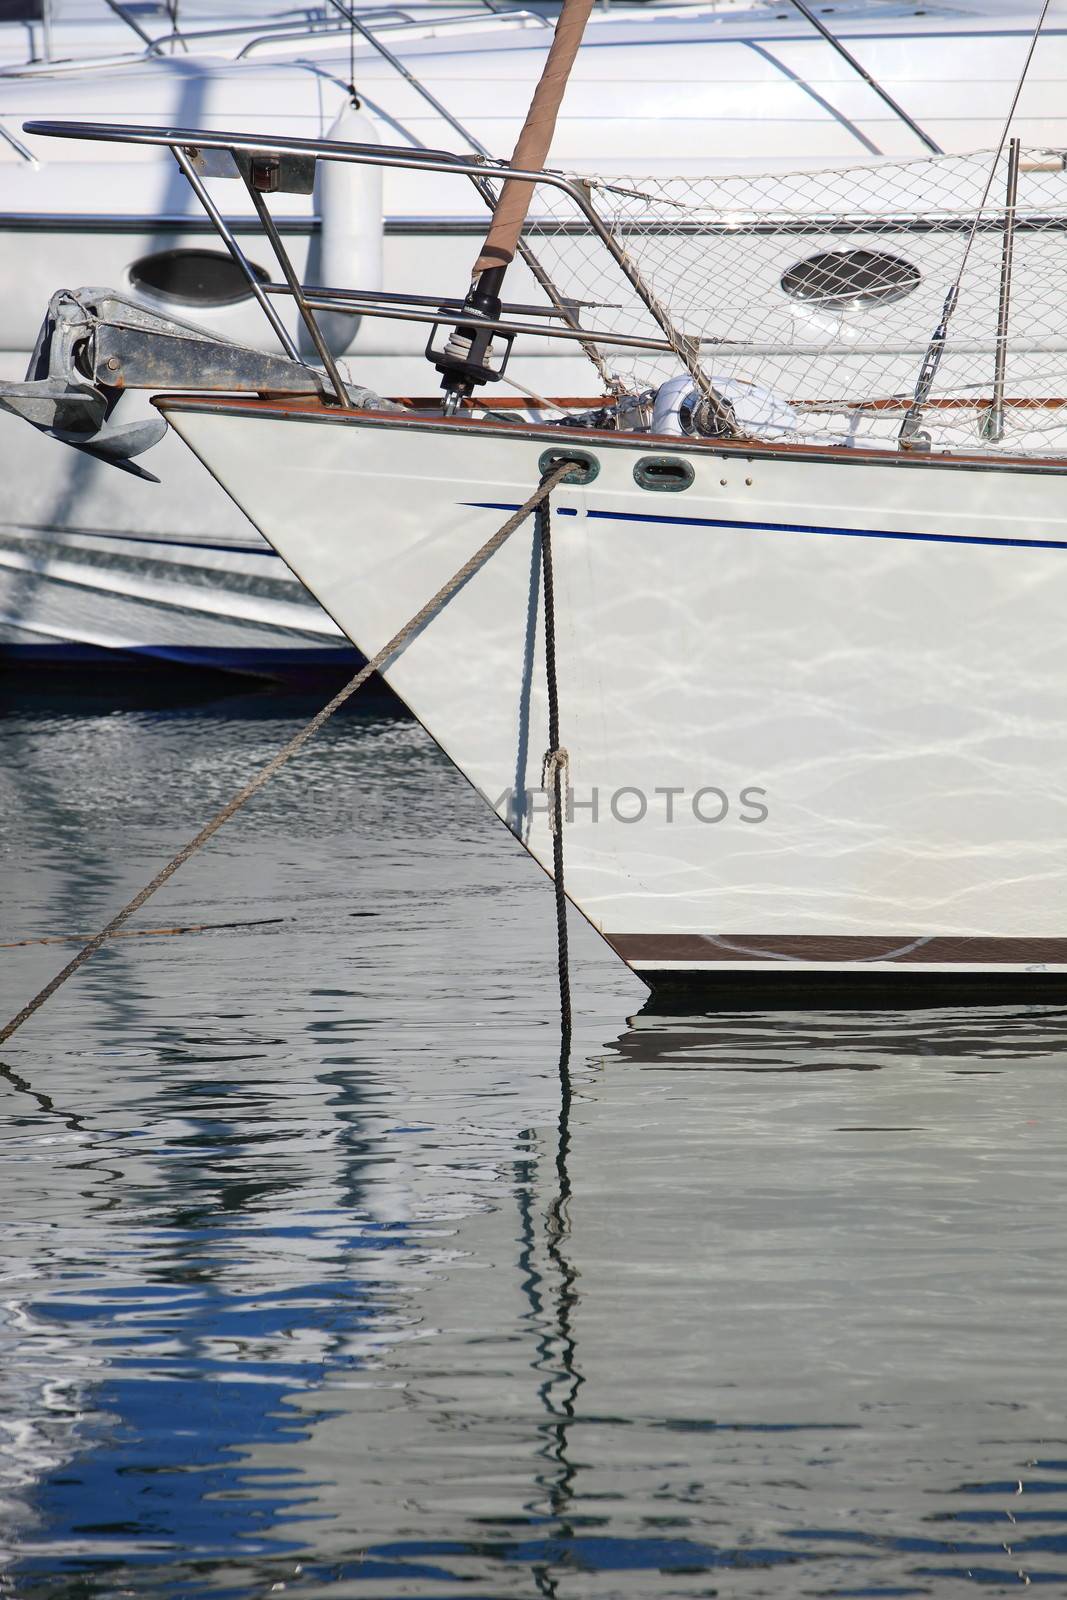 Bows and mooring lines on a pleasure boat or yacht moored in a marina